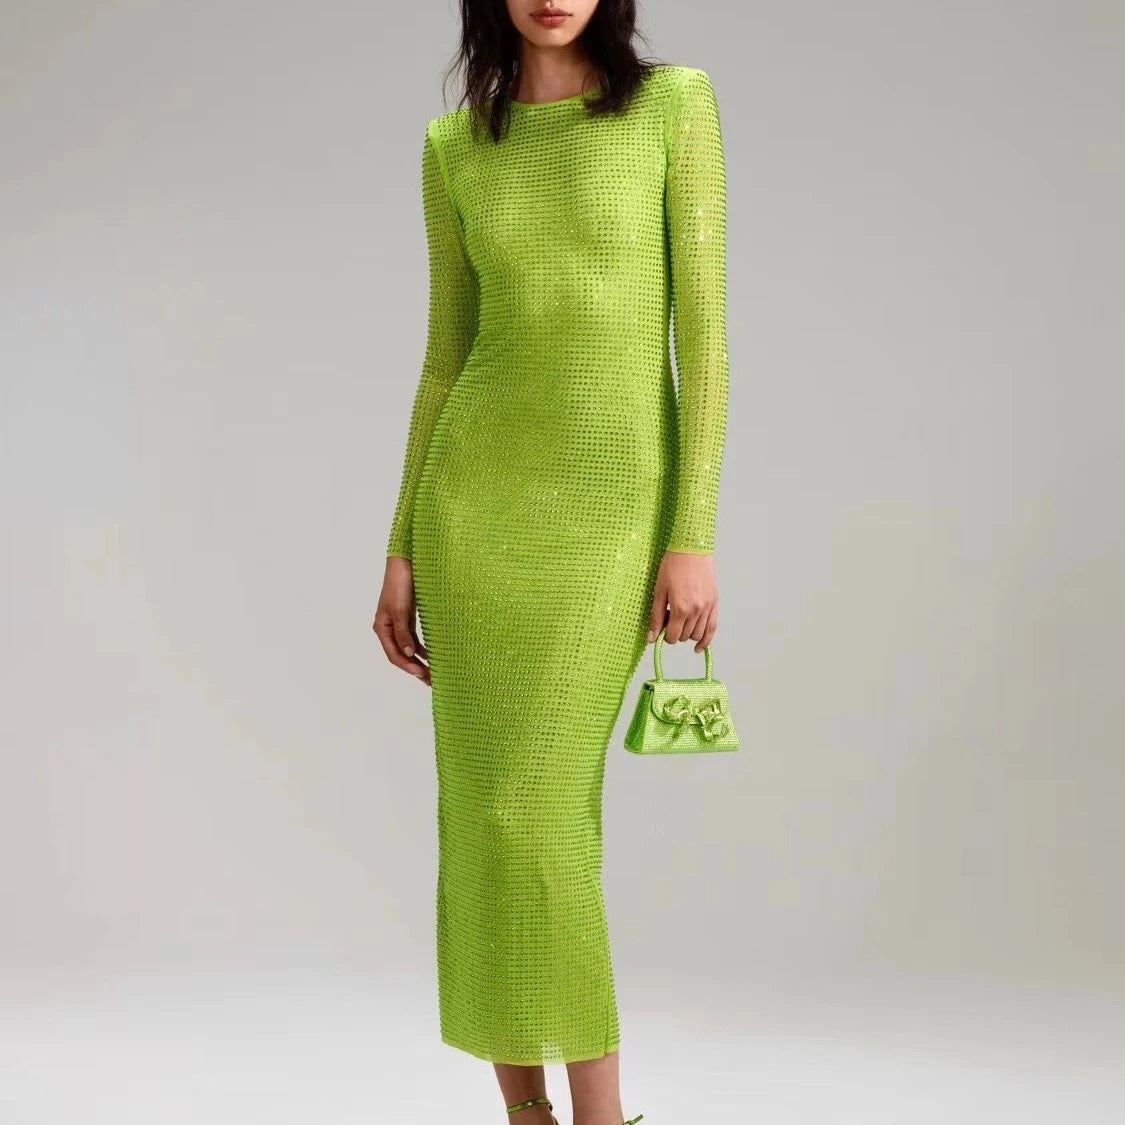 Unleash your inner shine with the Dress Nissa. This stunning green sequined dress features delicate beading and a bodycon fit that will make you stand out at any party. With long sleeves and a floor-length design, you'll be sure to turn heads and feel confident all night long.